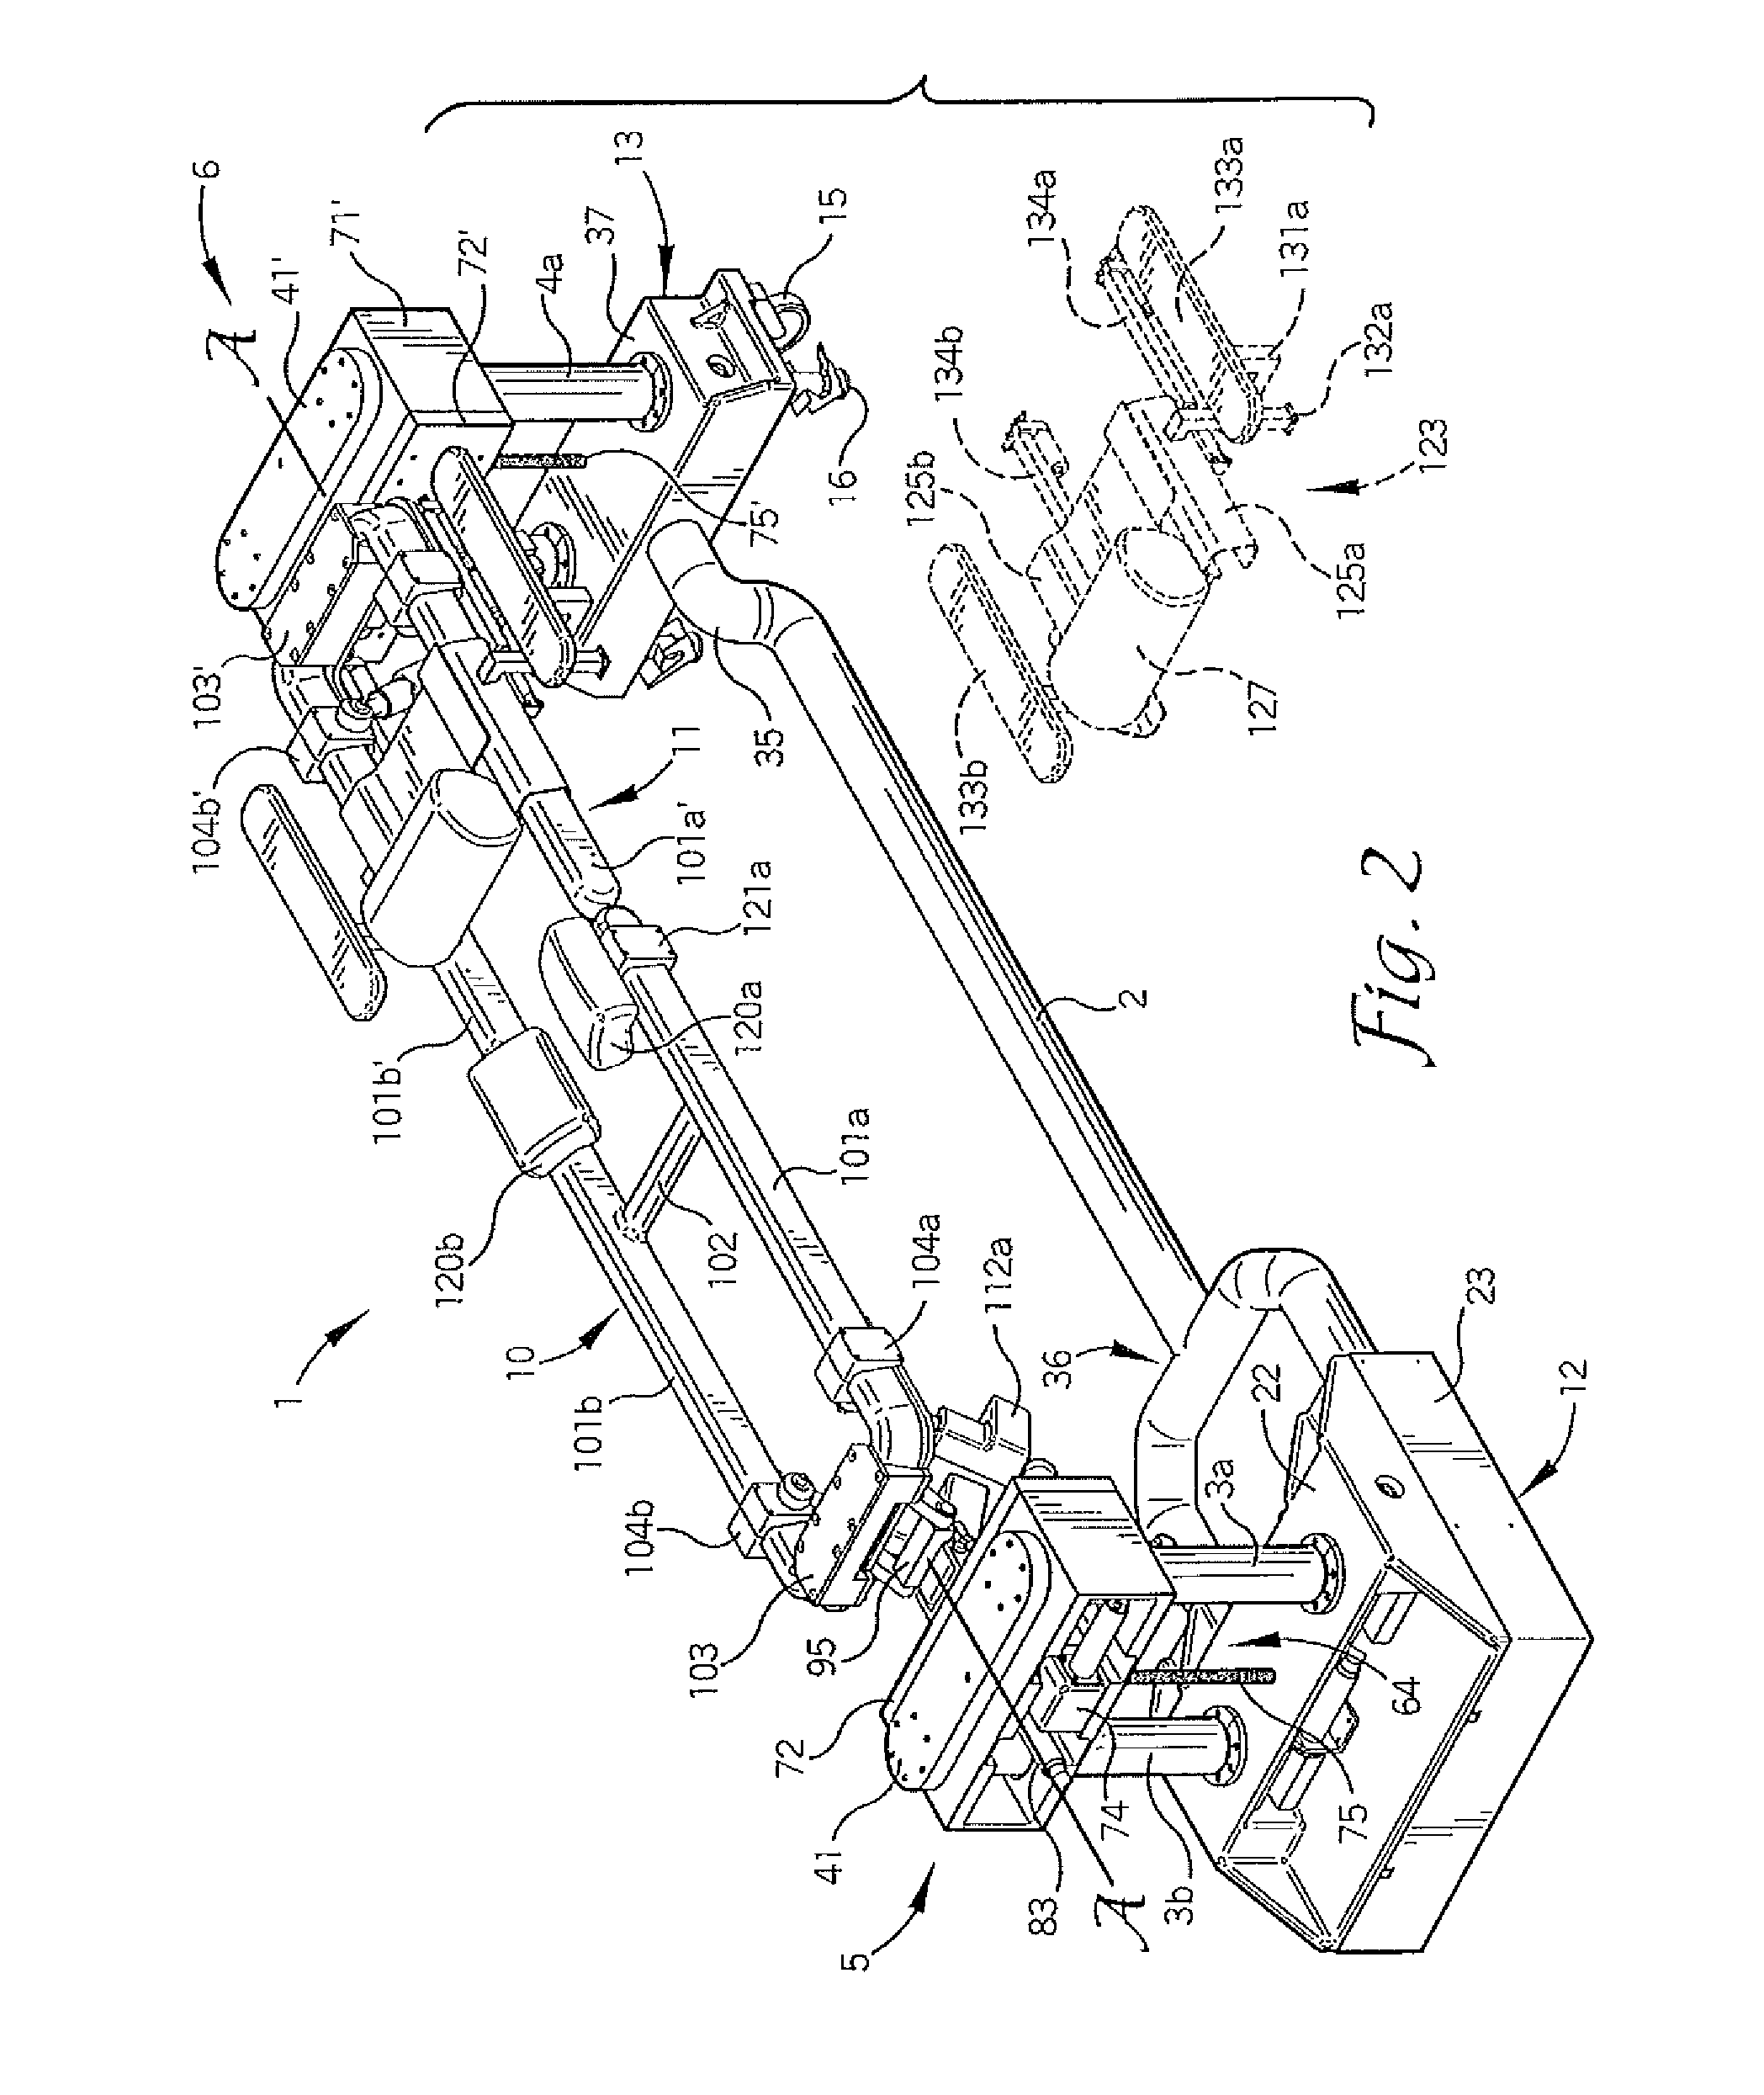 Patient positioning support structure with trunk translator